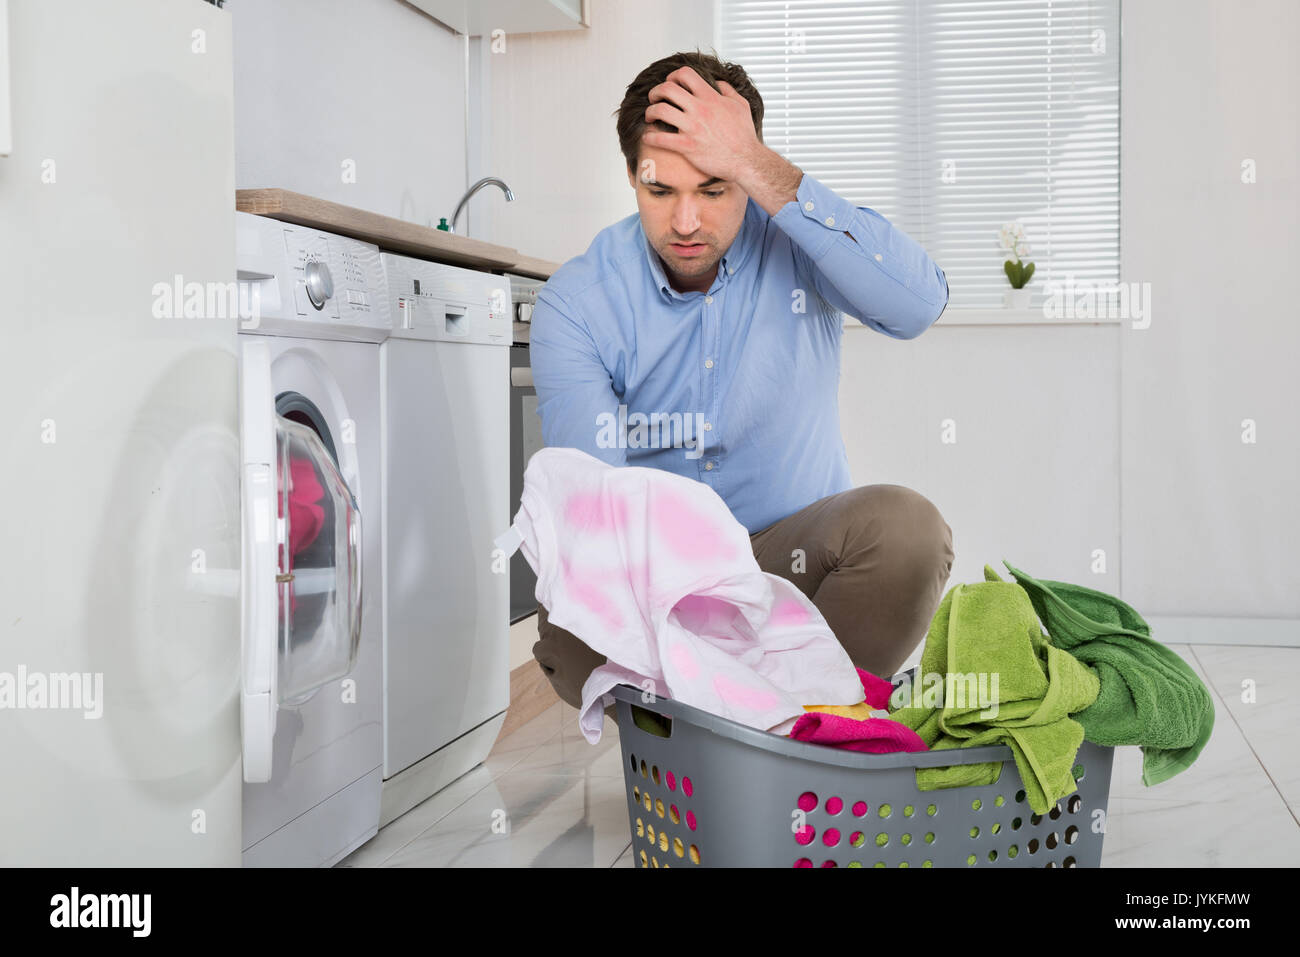 Man Near The Washing Machine With Laundry Basket Holding Stained Cloth In Kitchen Stock Photo